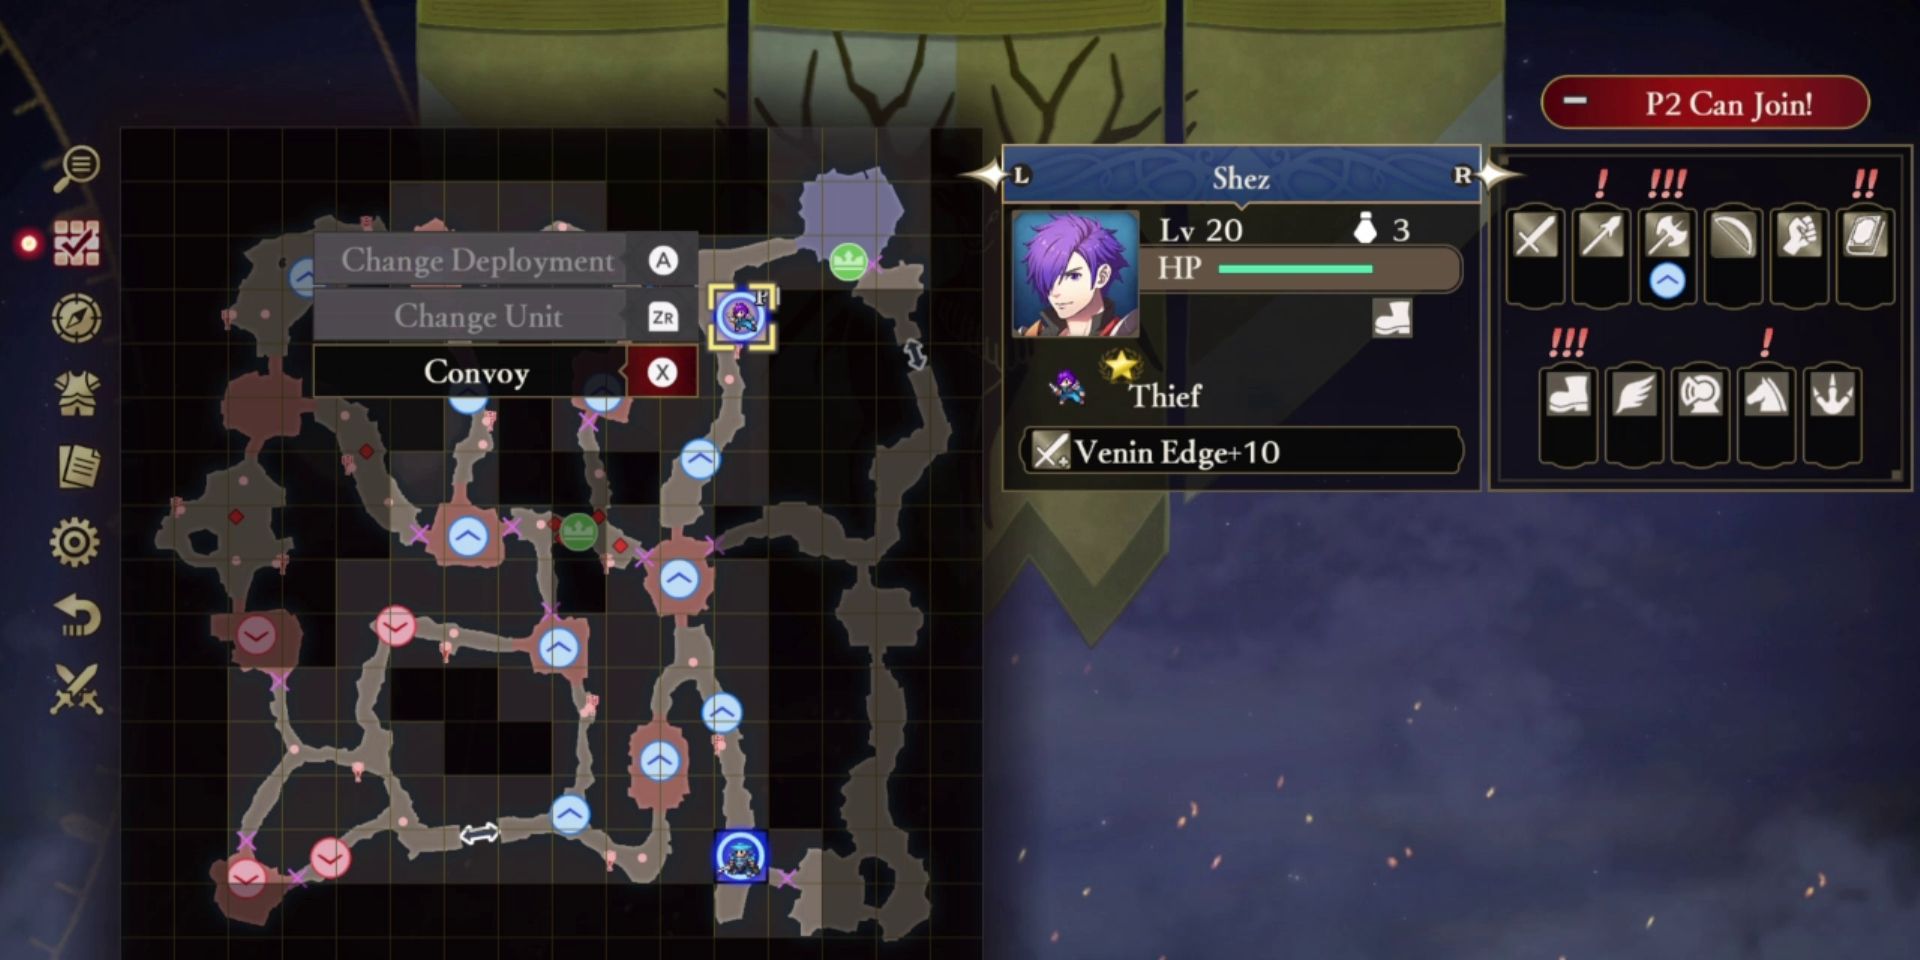 a battle map that shows the layout of the field. several blue up arrows and down red arrows dot the map. The cursor is hovering over Shez, a purple haired man with the Thief class equipped. a box next to his character description shows the various advantages and disadvantages he has against enemy units. 